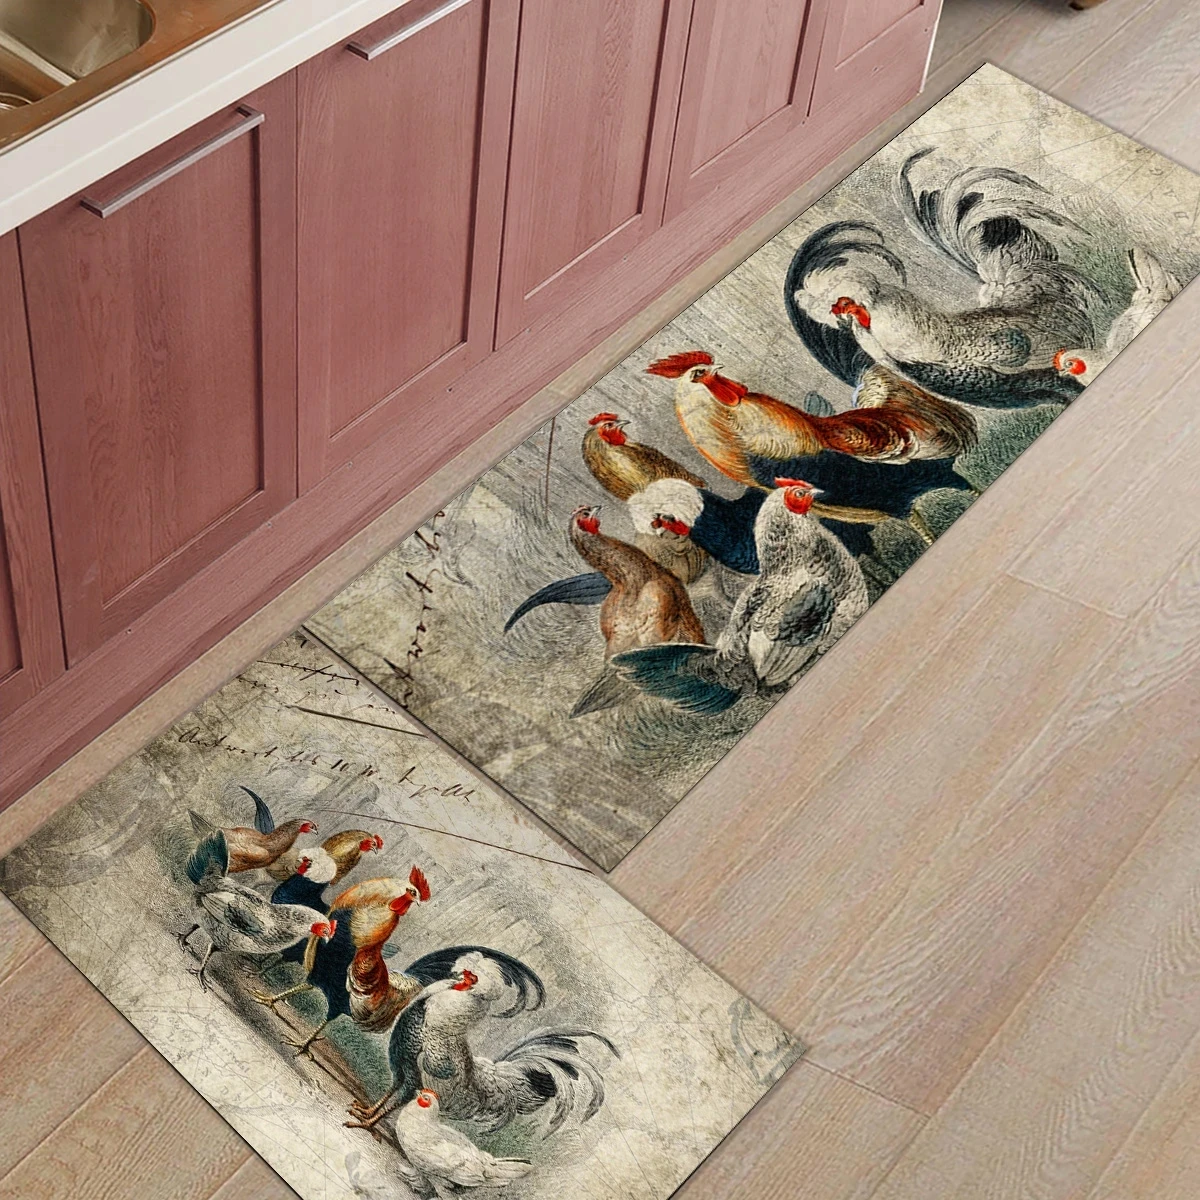 Rooster and Lemoms floorcloth in front of the refrigerator